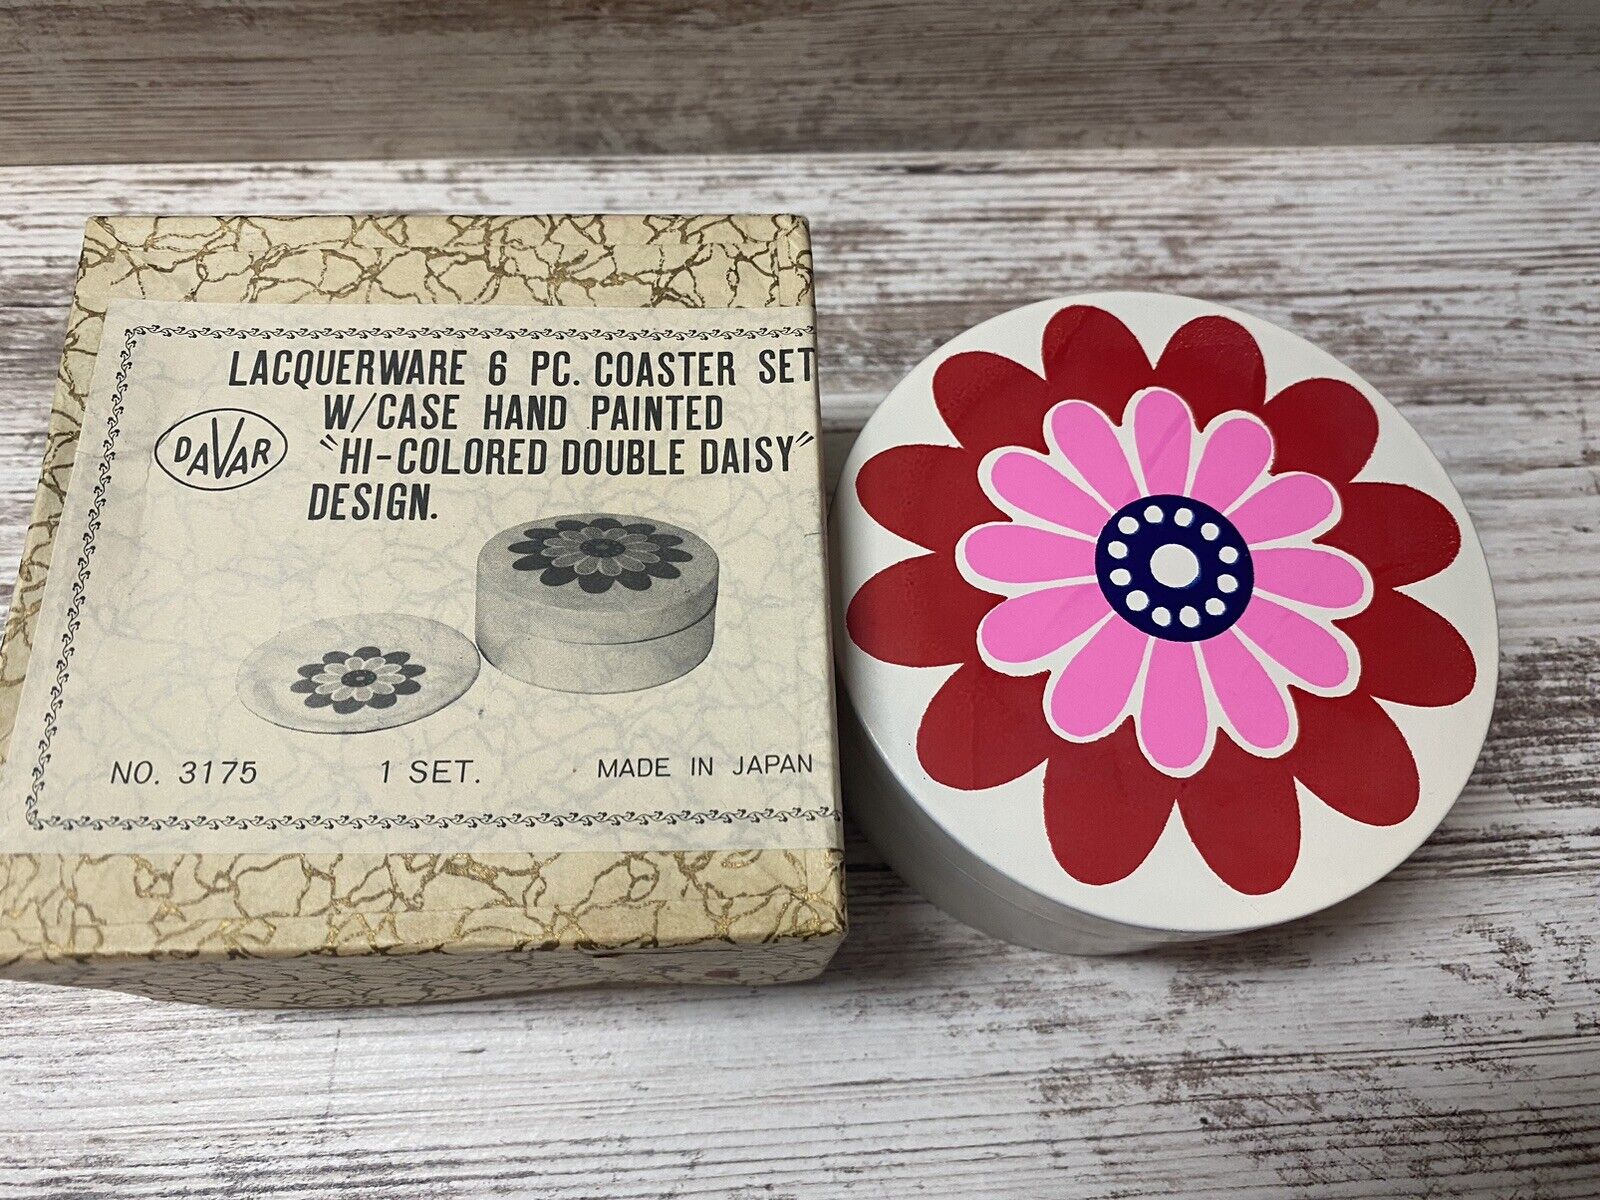 Vintage Lacquerware Round Coaster Set of 6 in Box Mid Mod Floral Double Daisy